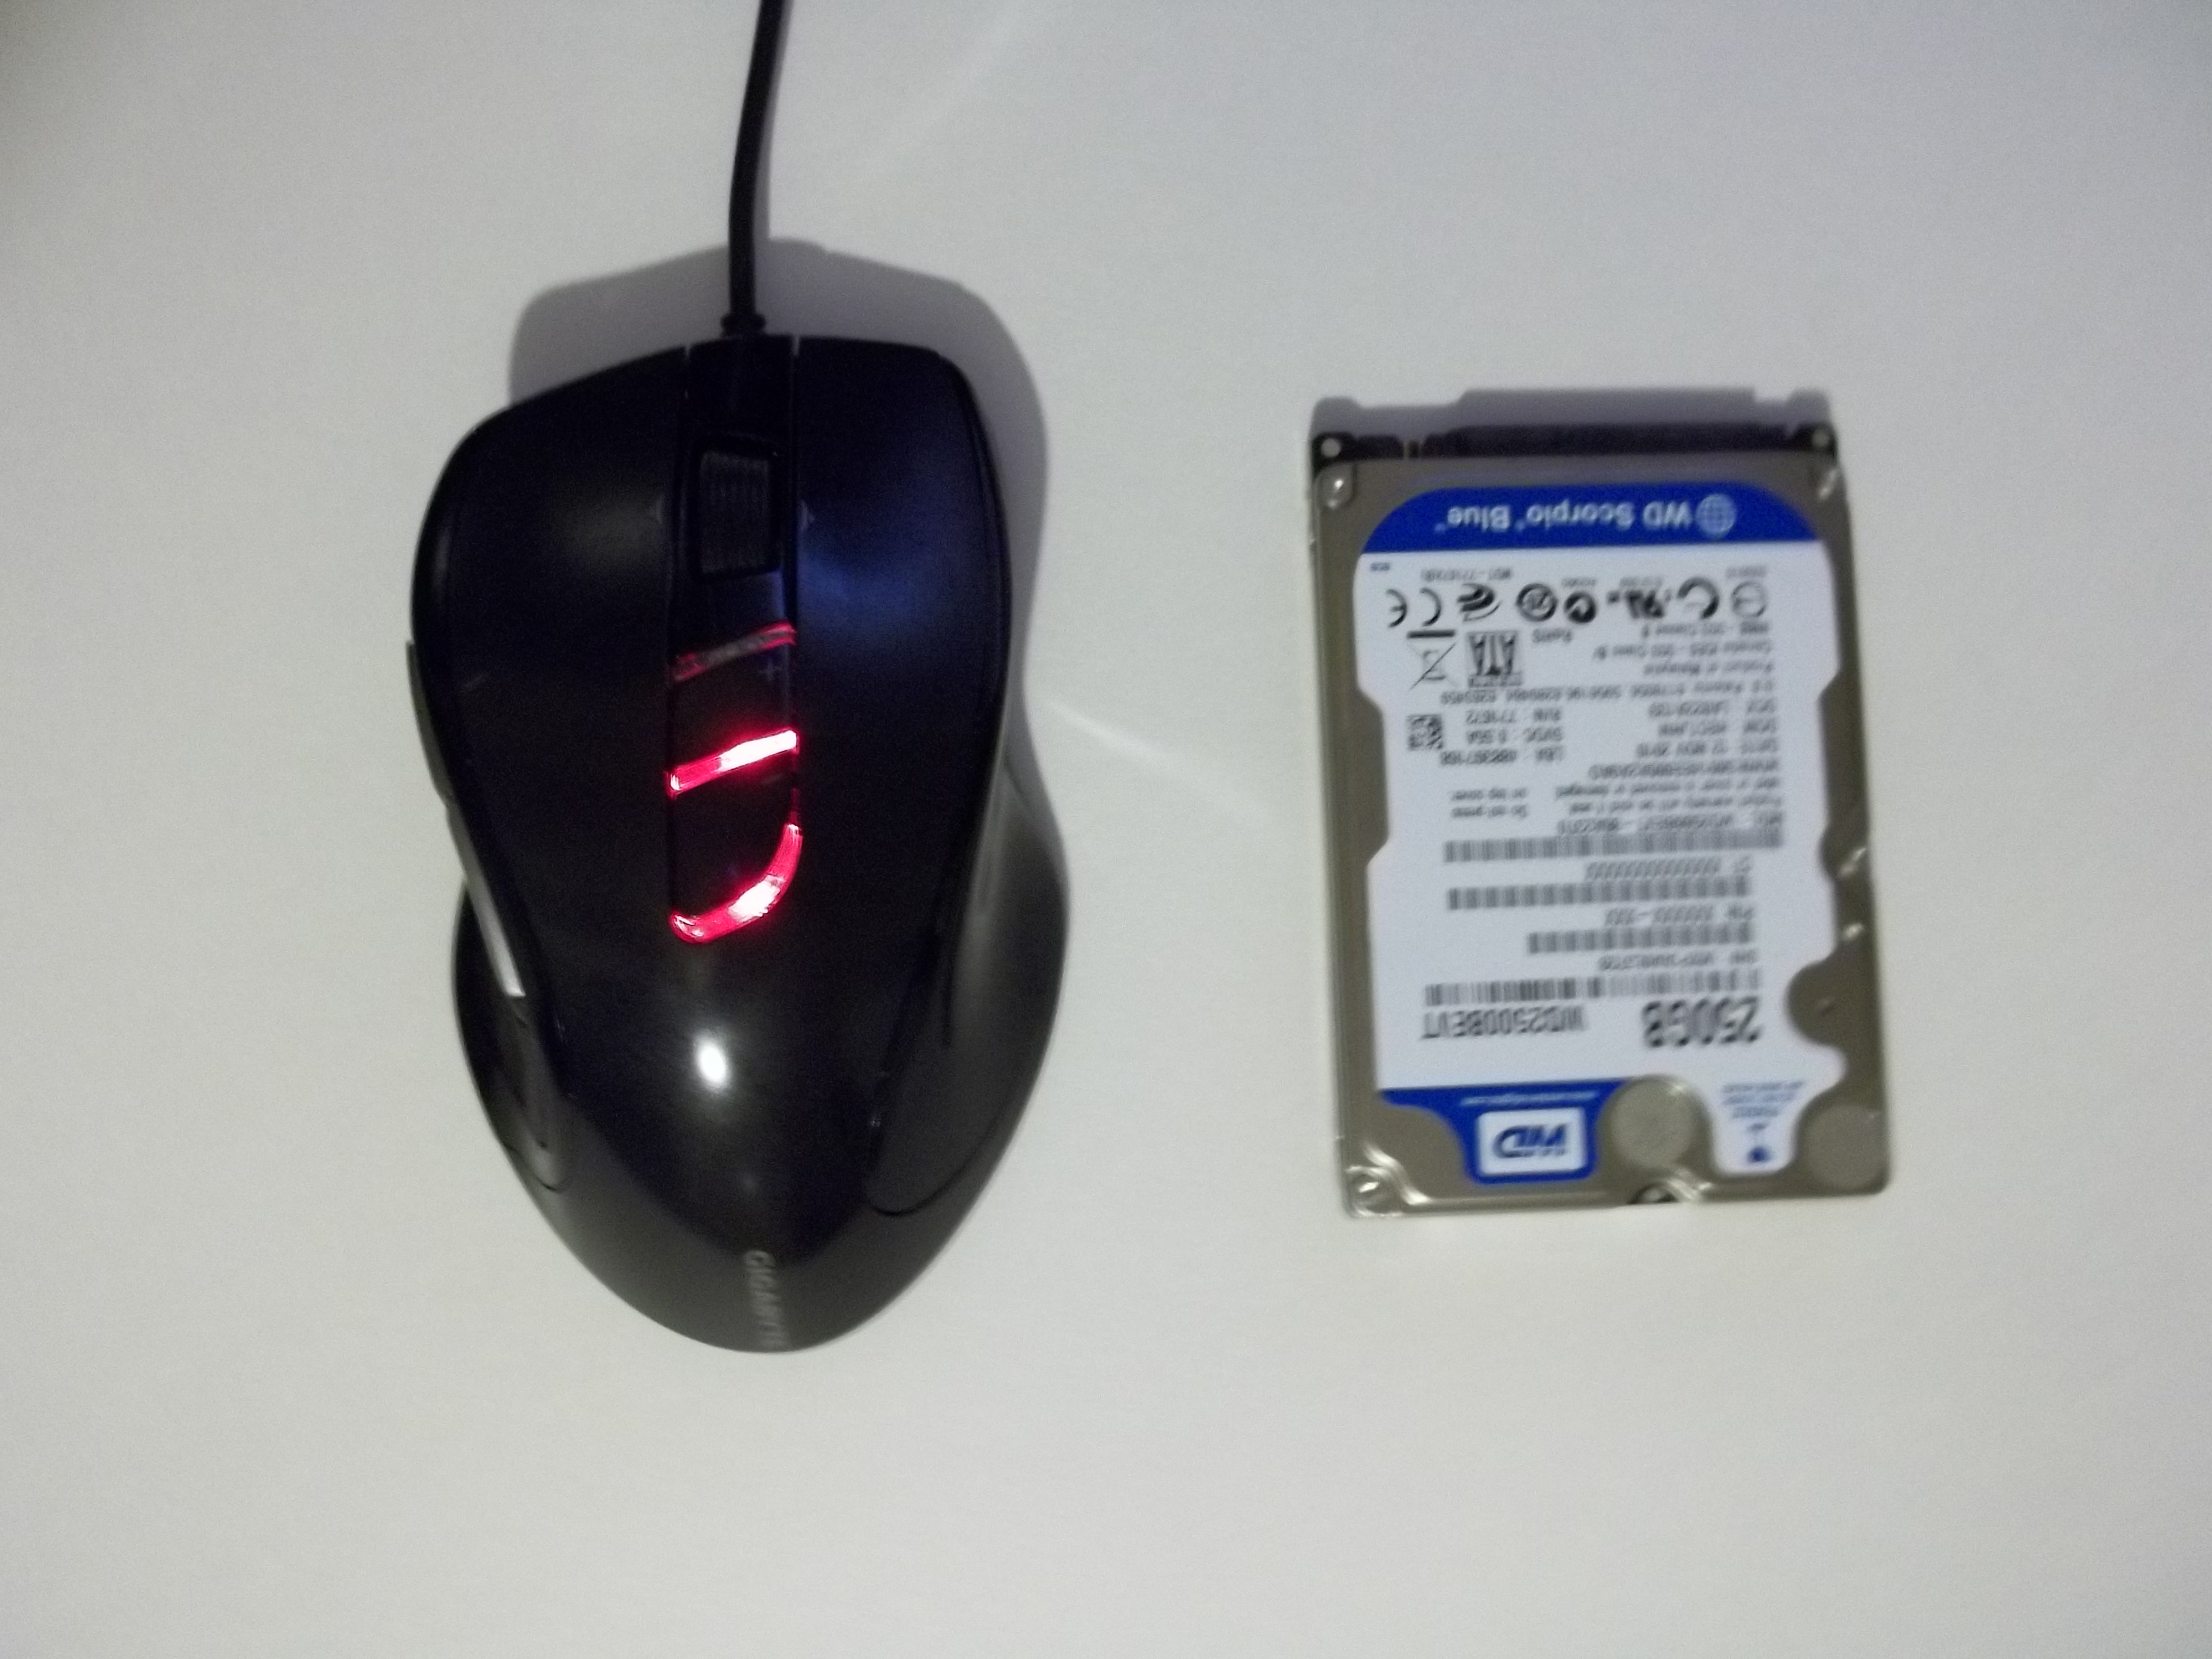 Gigabyte mouse drivers m6900